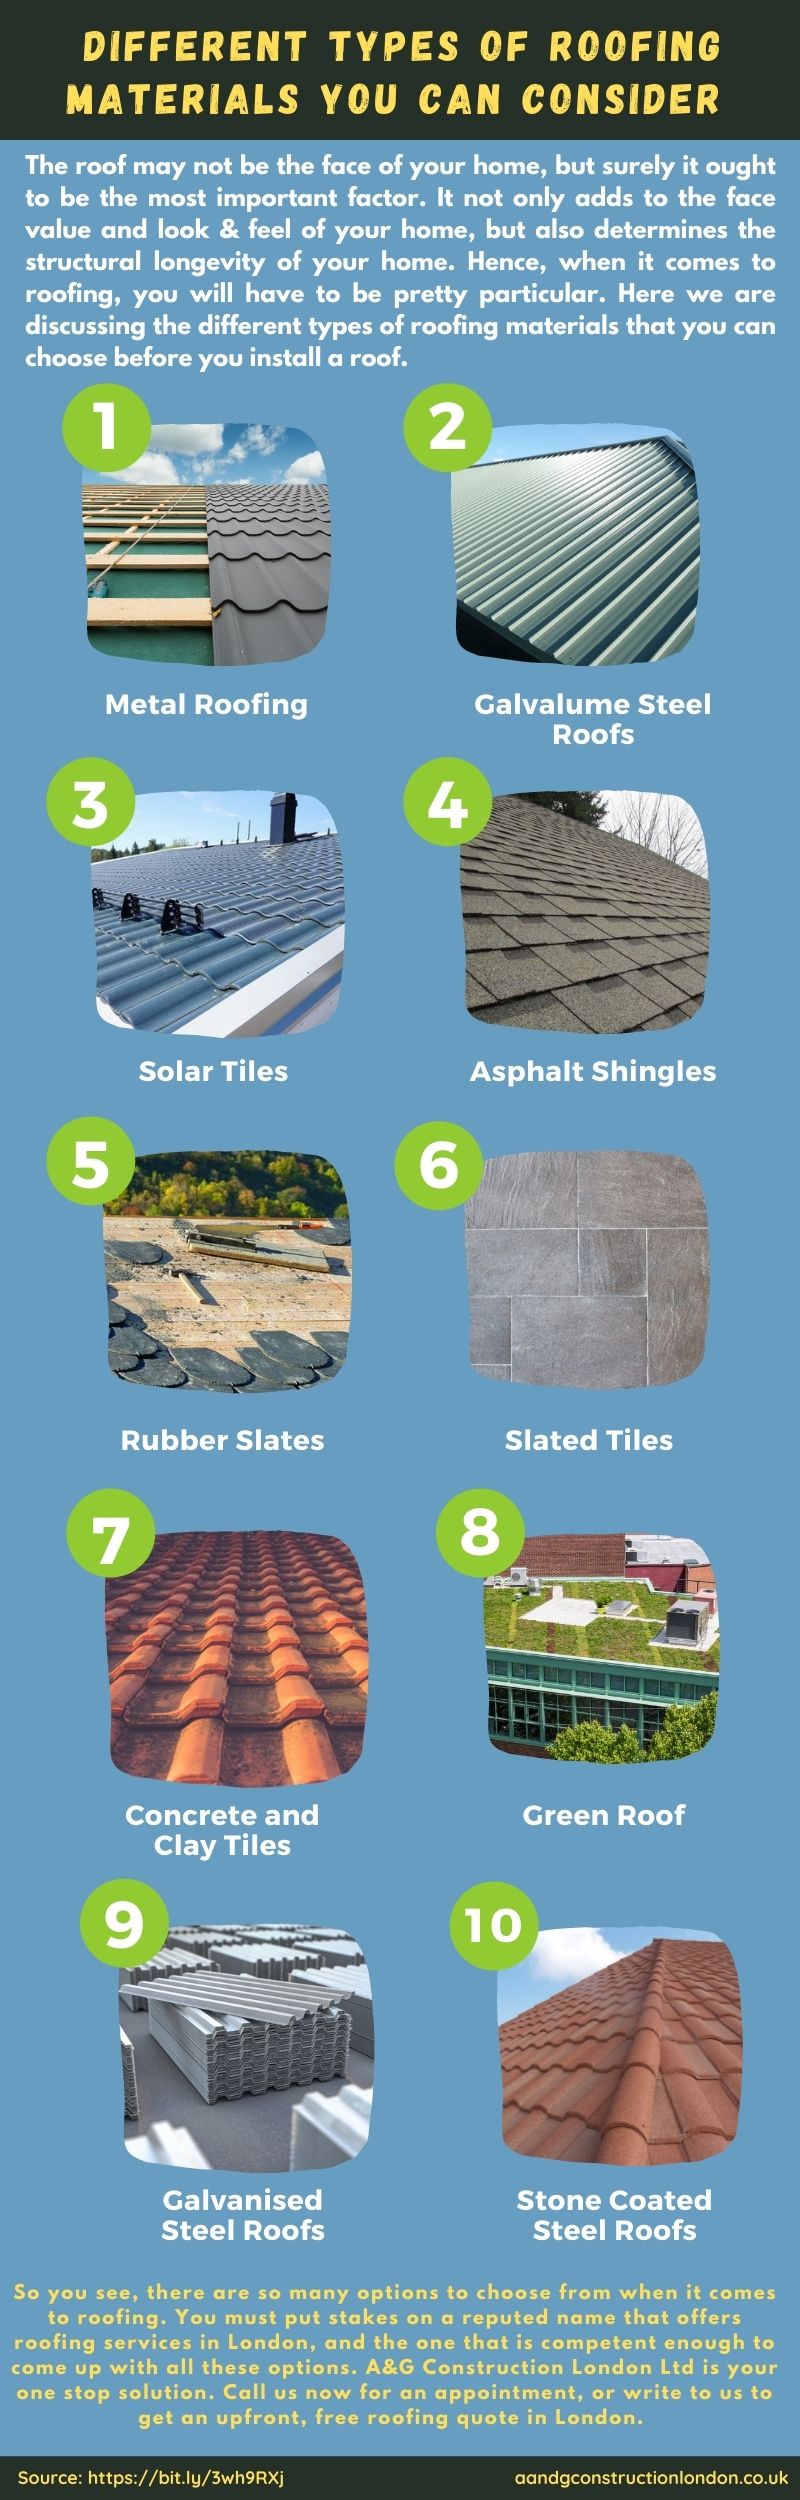 Different Types of Roofing Materials You Can Consider 